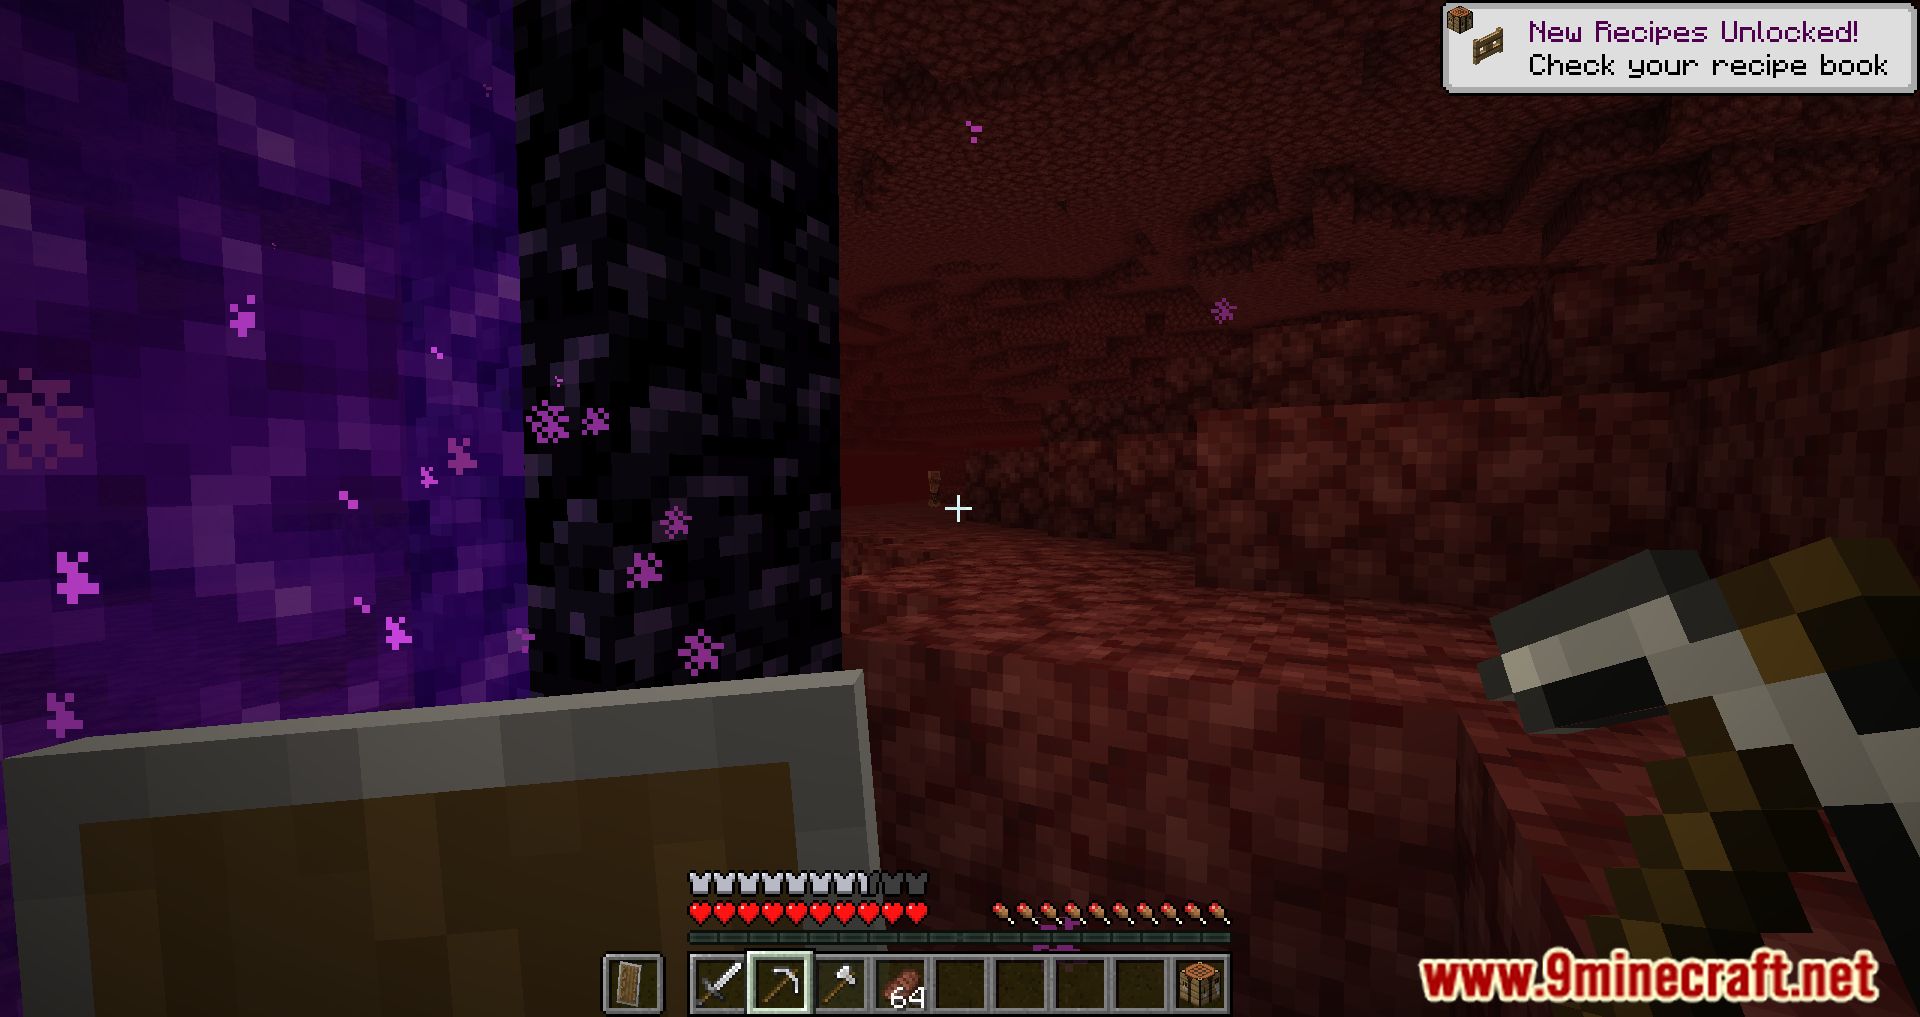 Nether Portal Accessibility Mod (1.19.2, 1.18.2) - Introducing New Features 9